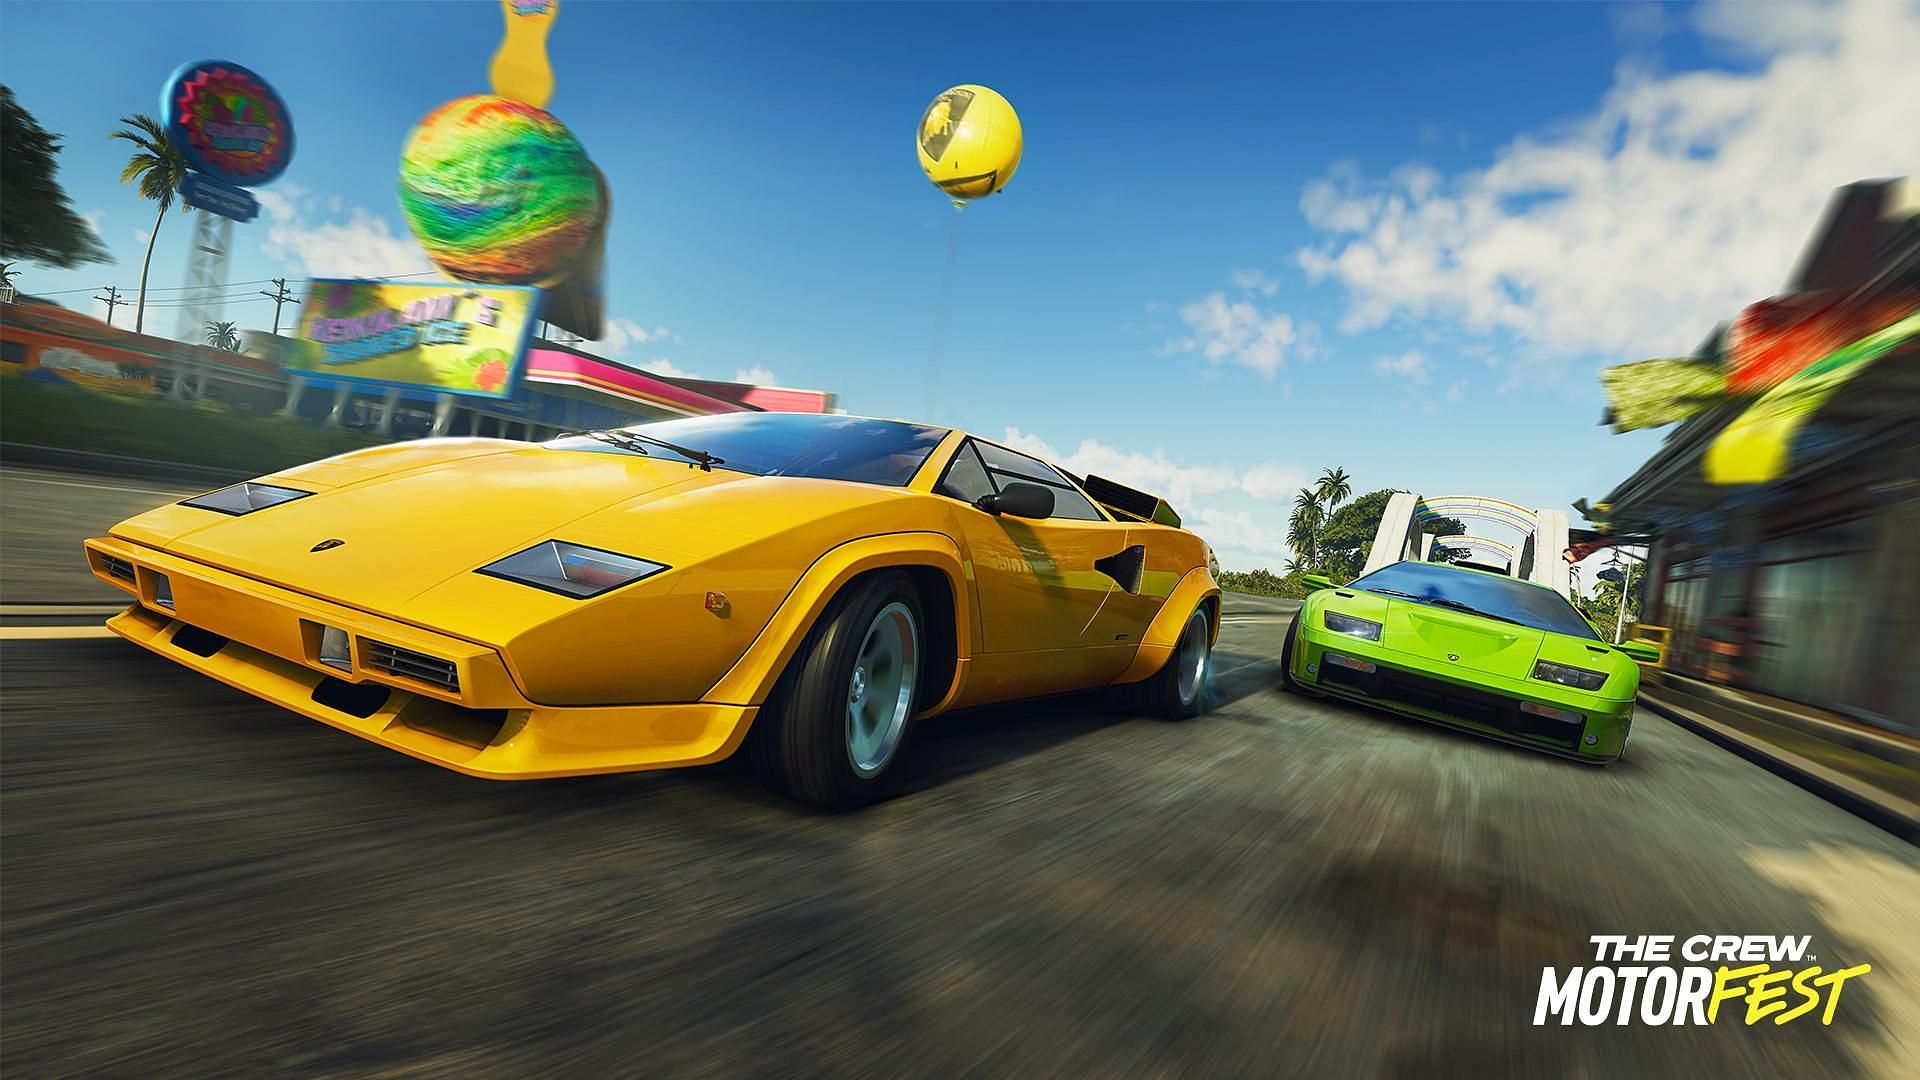 Review: The Crew Motorfest